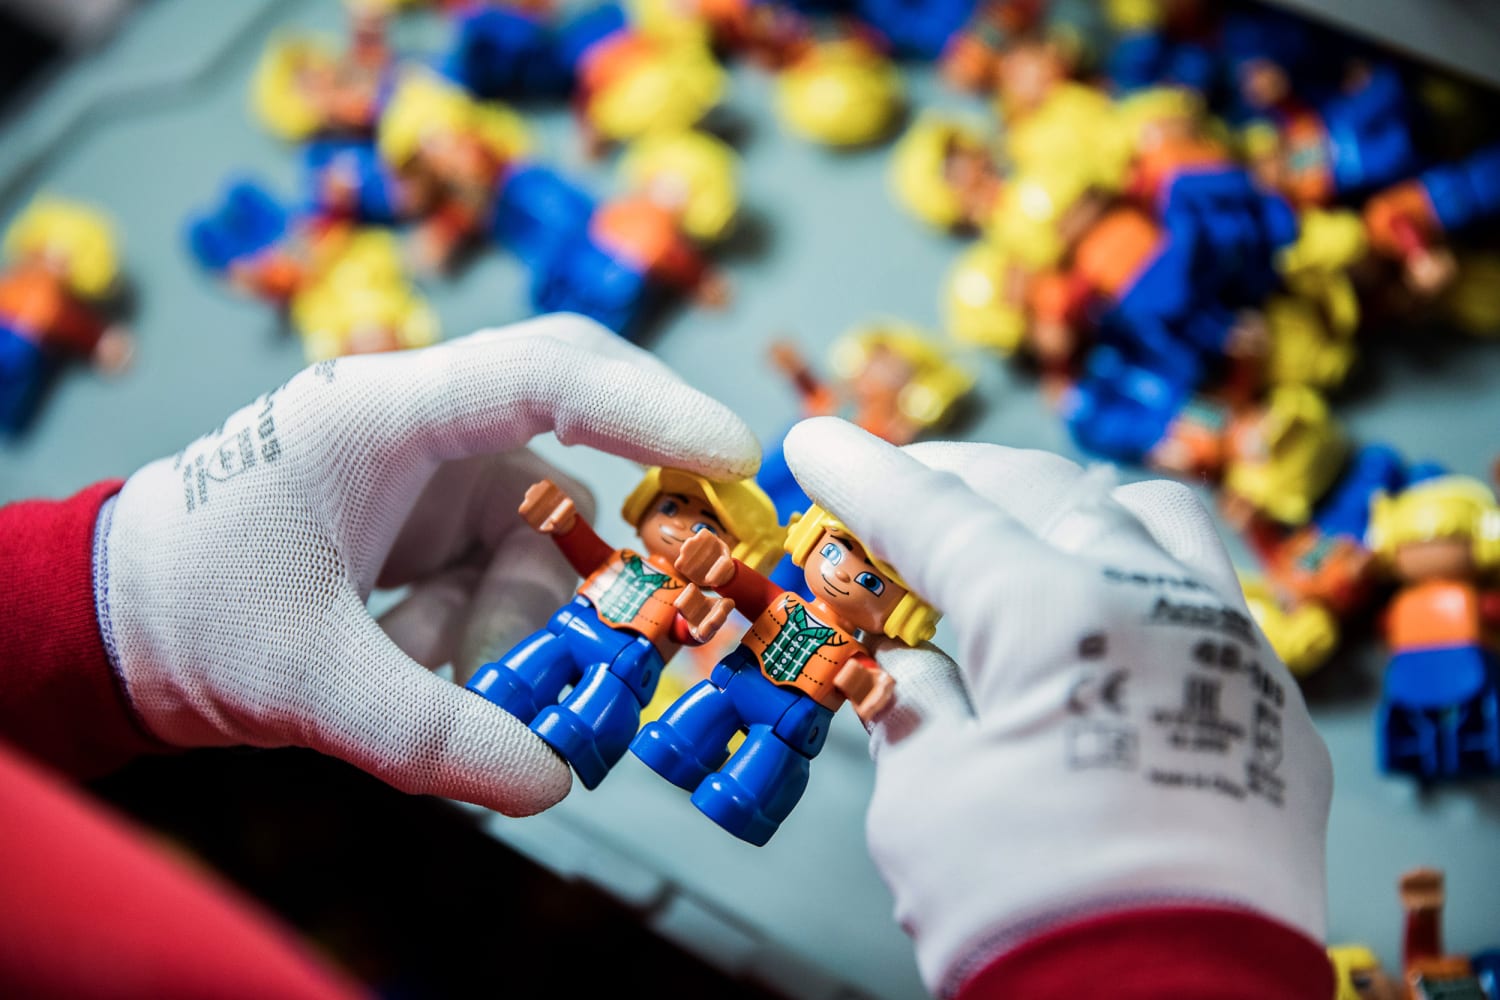 LEGO to Cut 1,400 Jobs After Sales Boom Ends